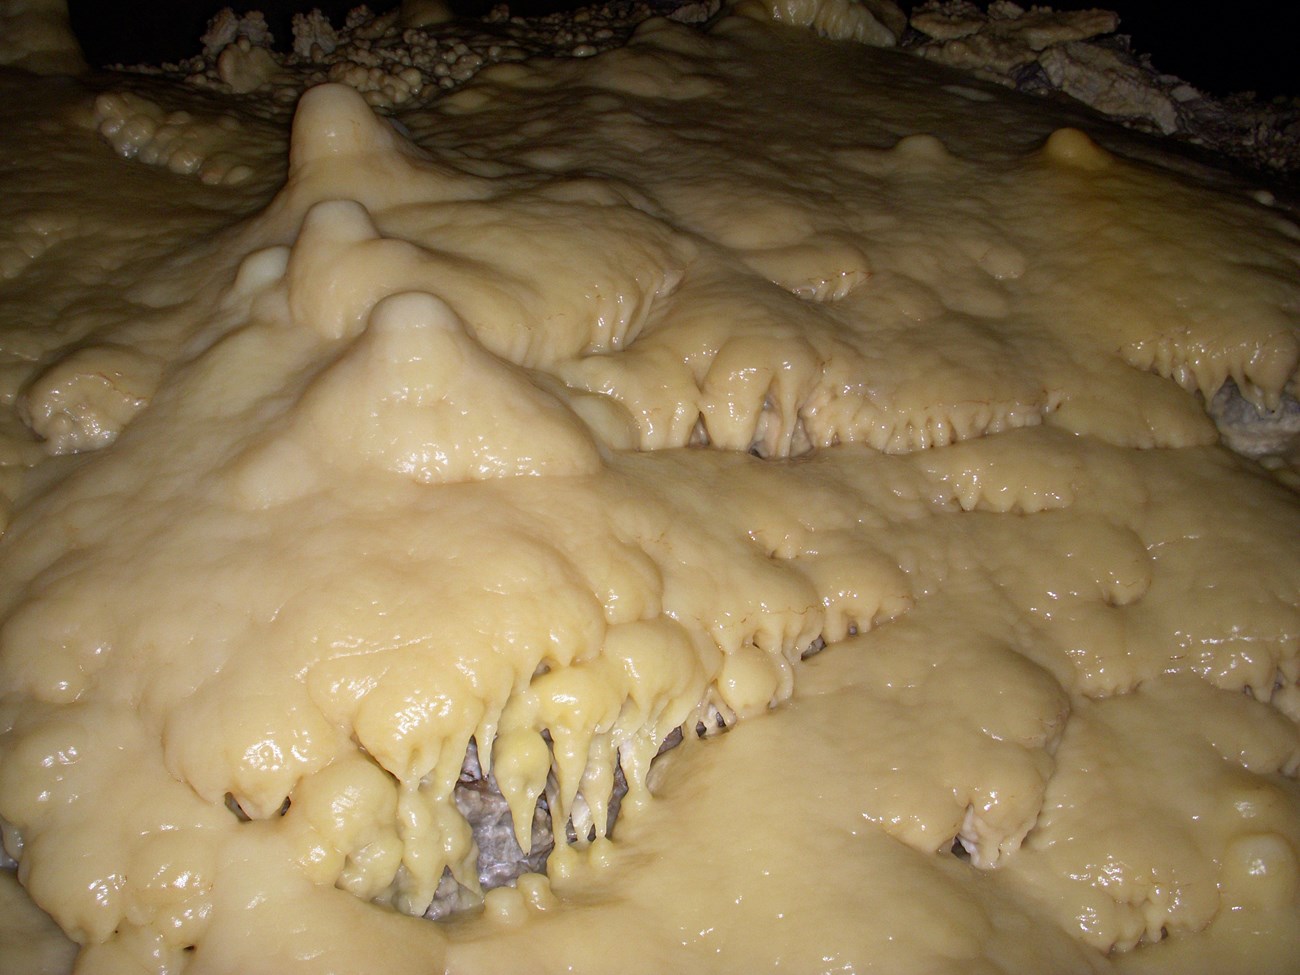 A light colored mineral coats the cave rocks forming "drips" and "mounds